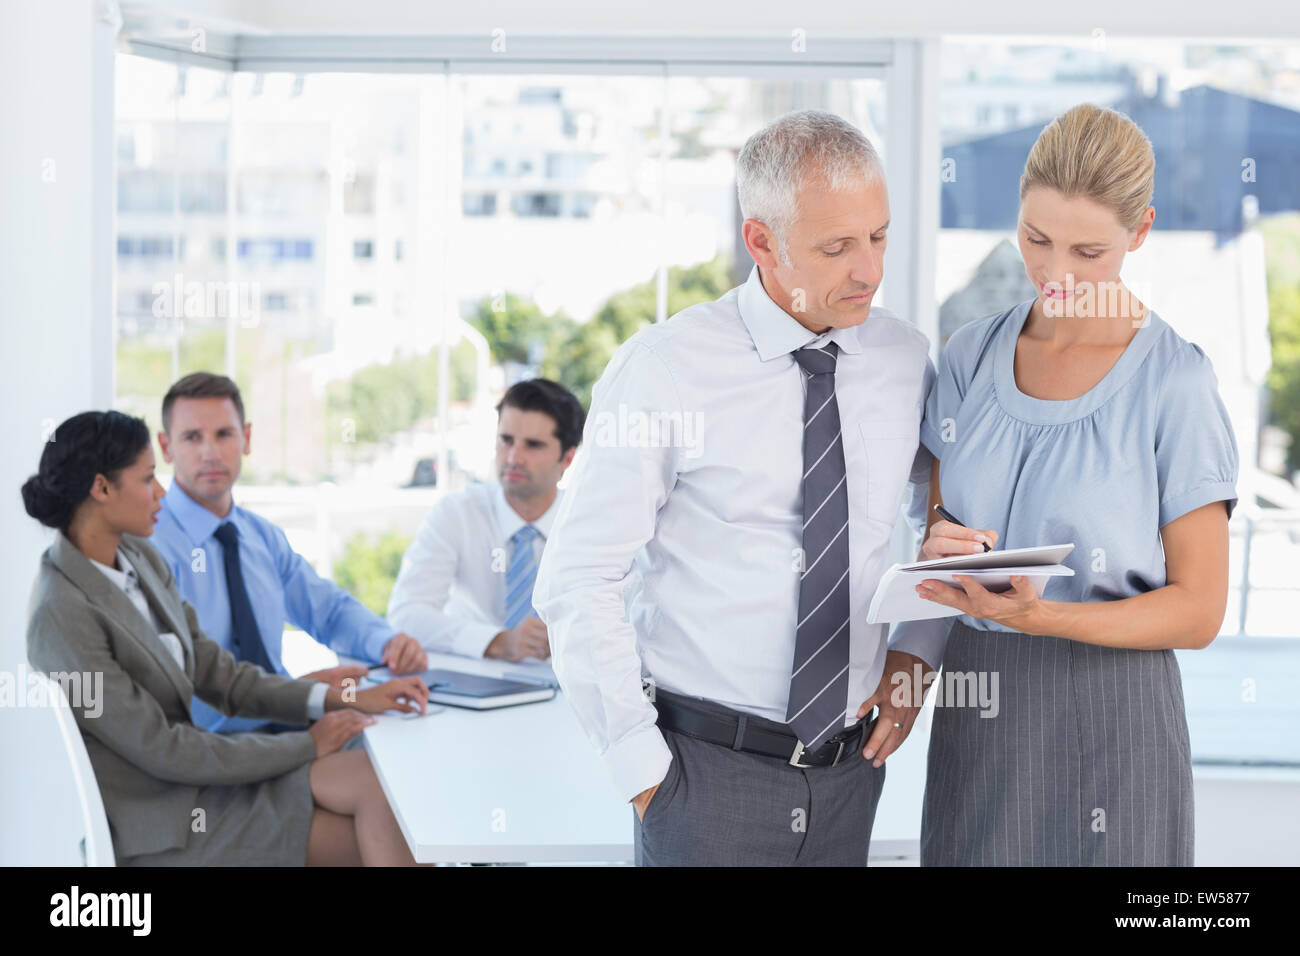 Colleagues speaking about work Stock Photo